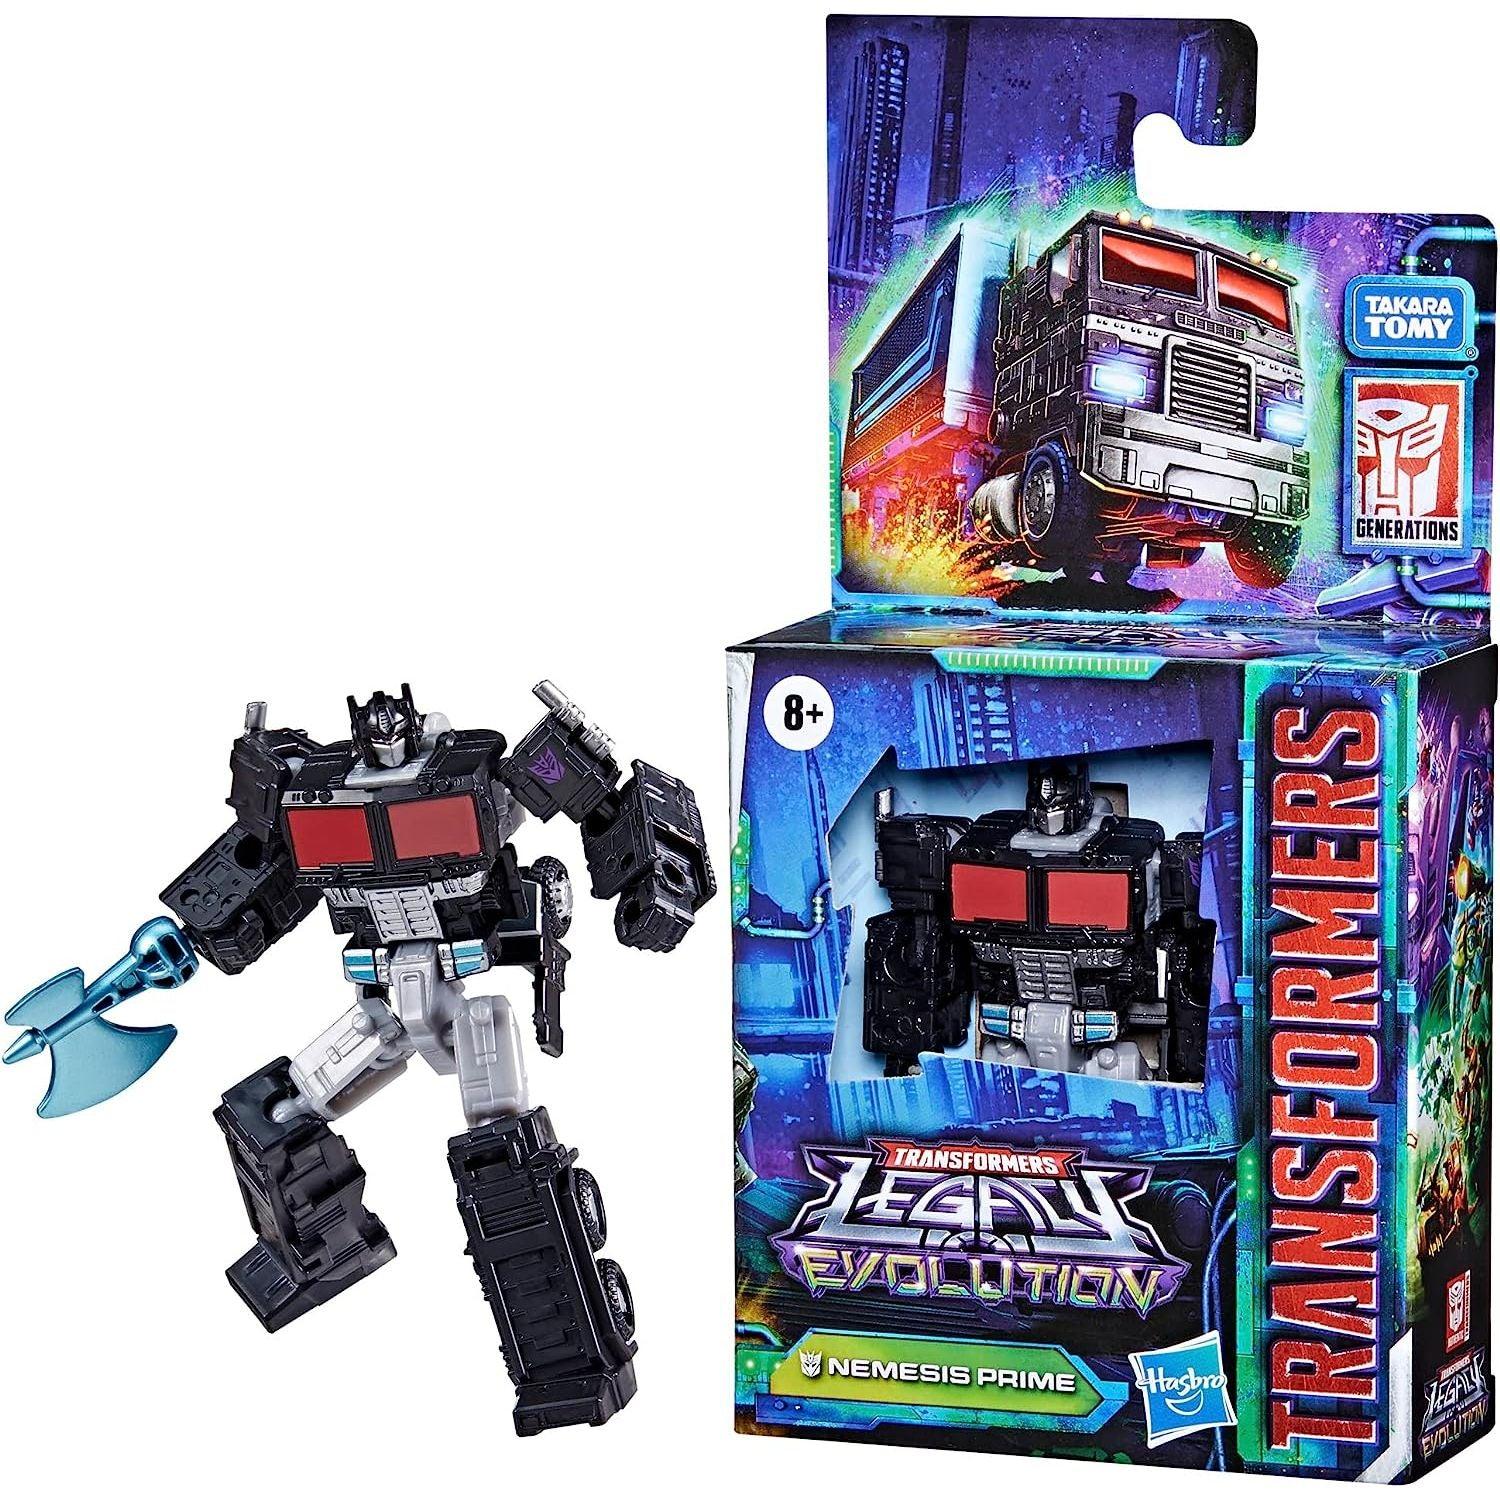 Transformers Toys Legacy Evolution Core Nemesis Prime Toy, 3.5-inch, Action Figure - BumbleToys - 6+ Years, 8+ Years, 8-13 Years, Action Figures, Boys, Figures, Pre-Order, Transformers